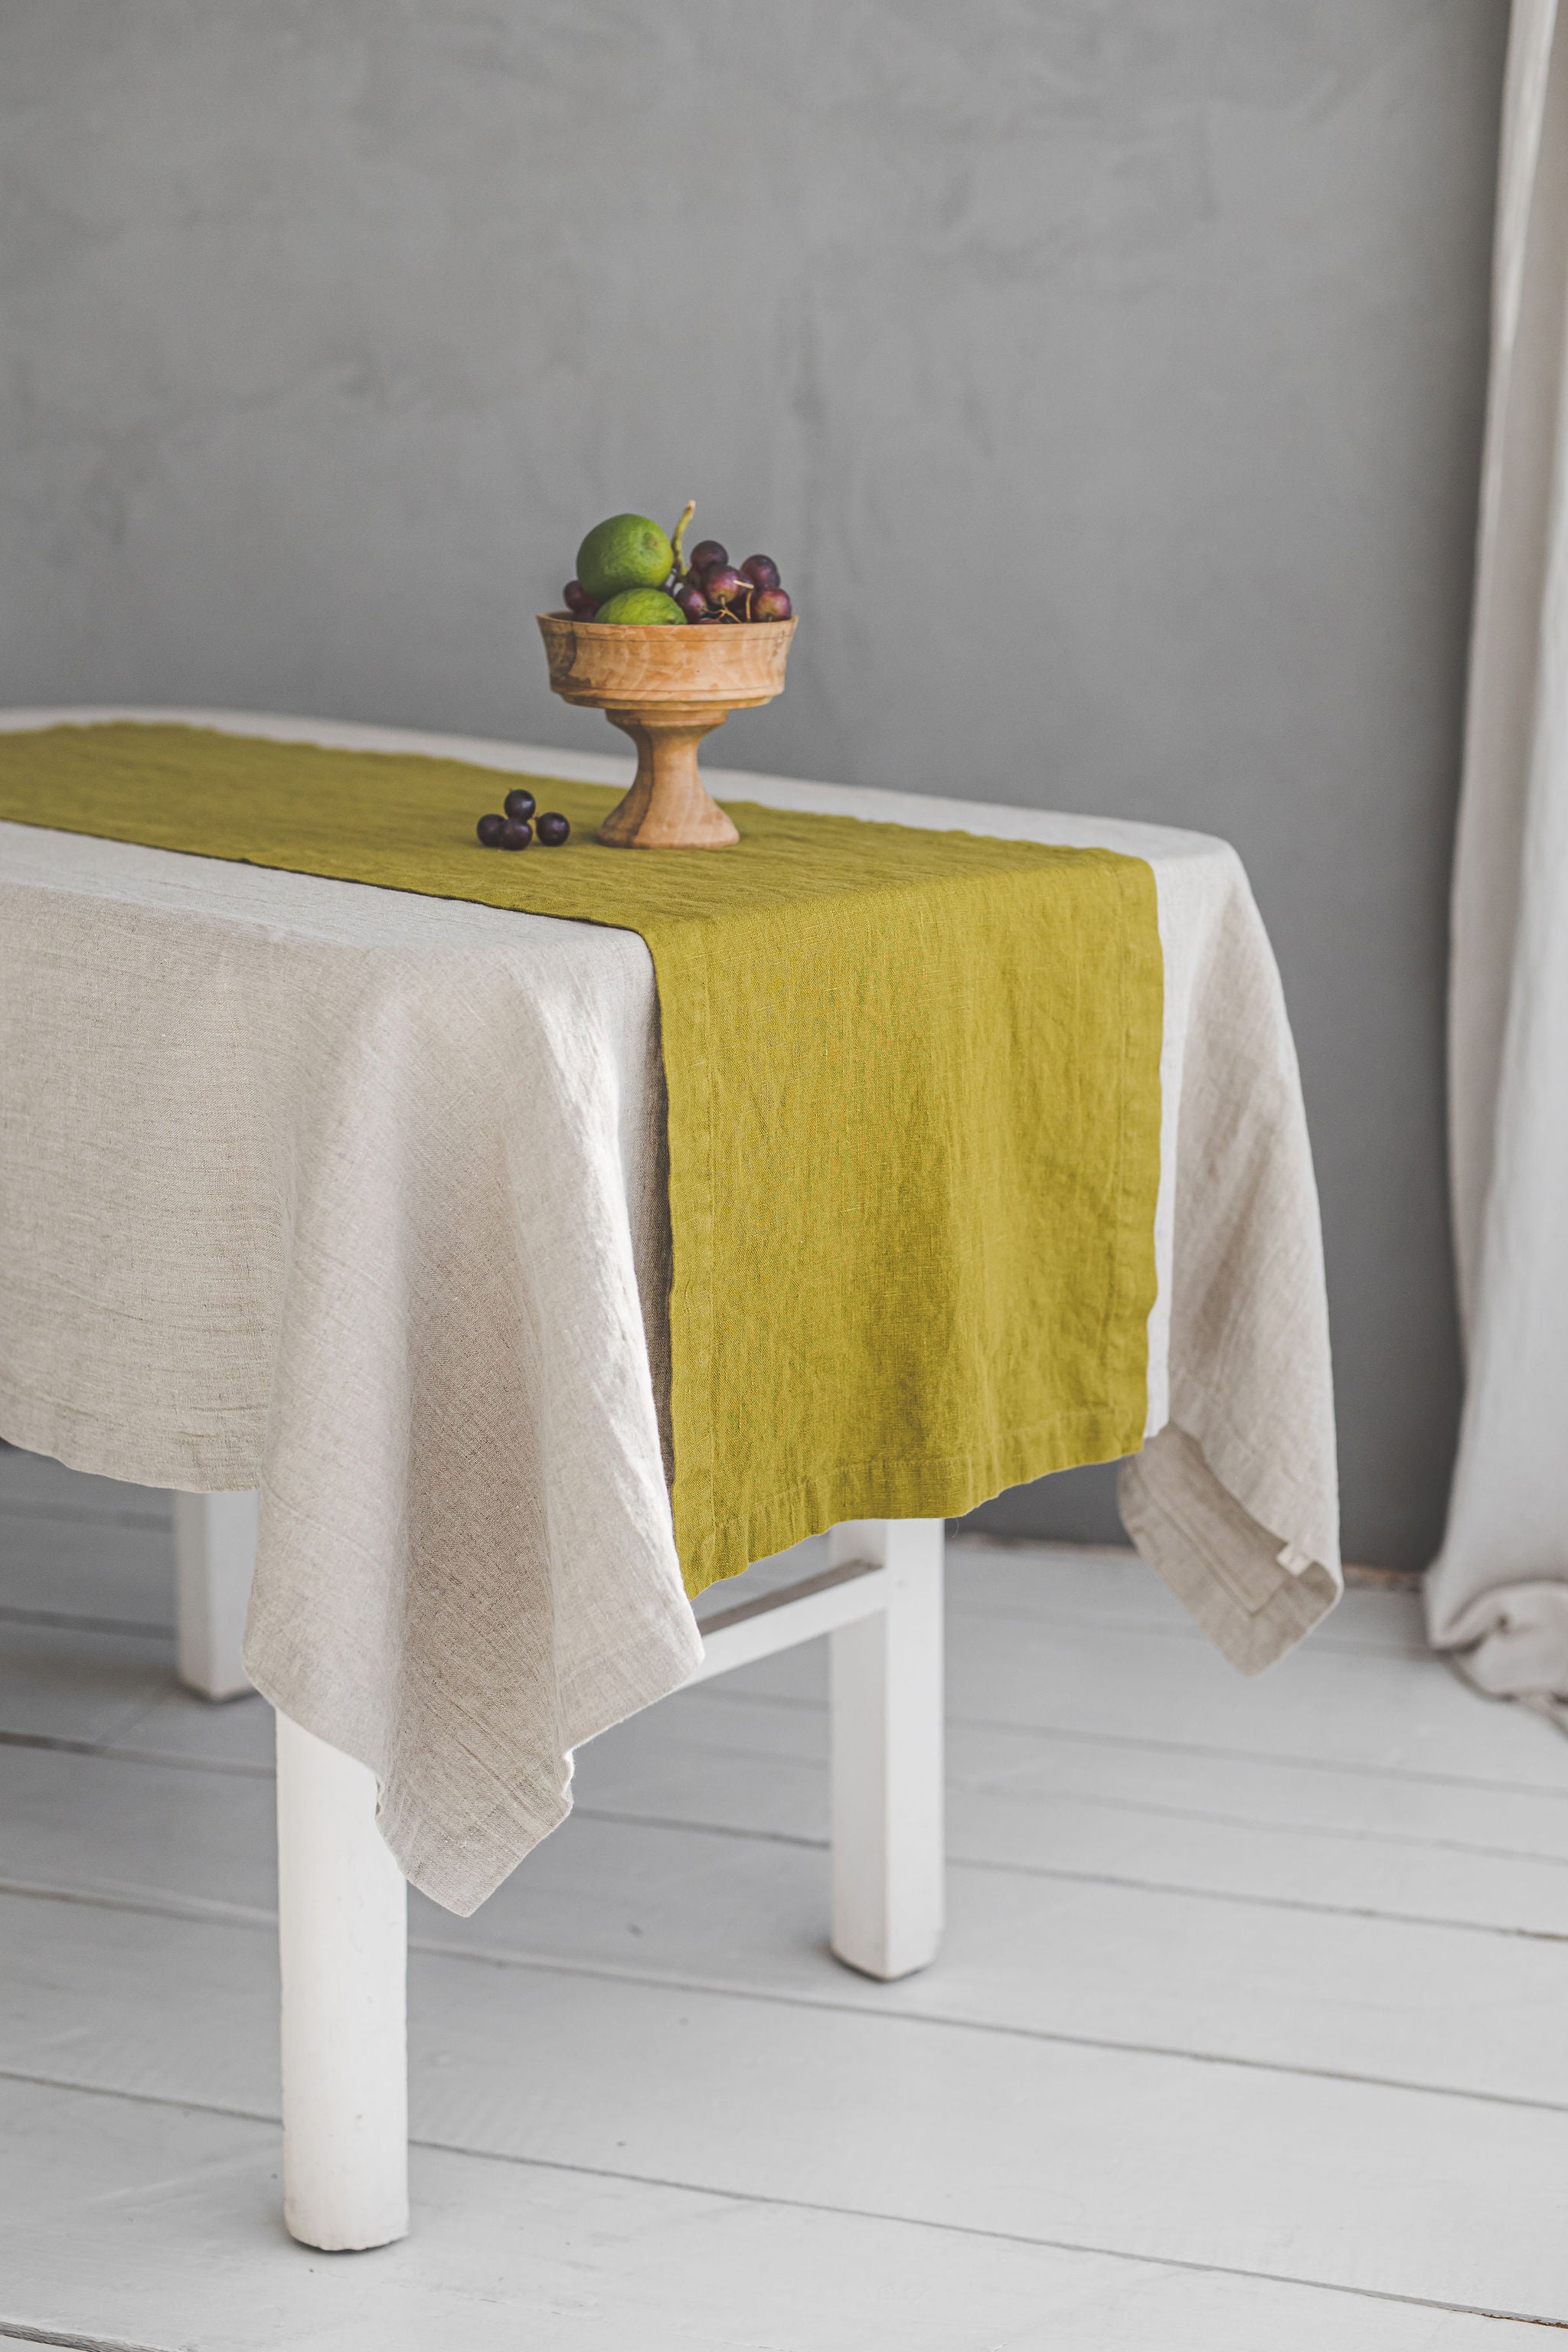 Olive green linen table runner with mitered corners